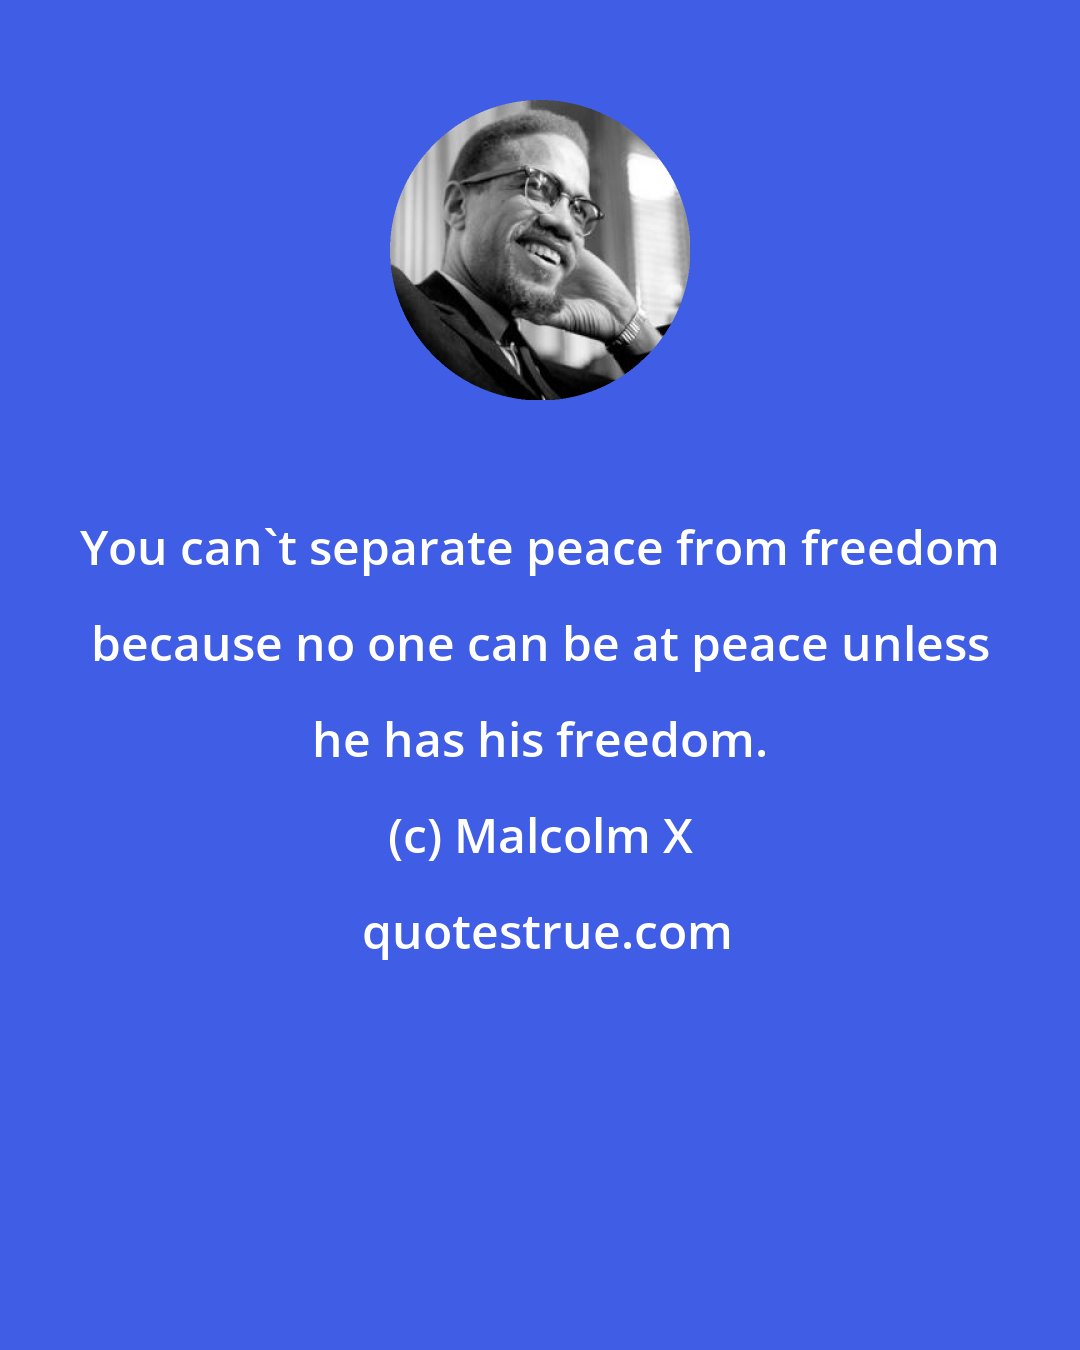 Malcolm X: You can't separate peace from freedom because no one can be at peace unless he has his freedom.